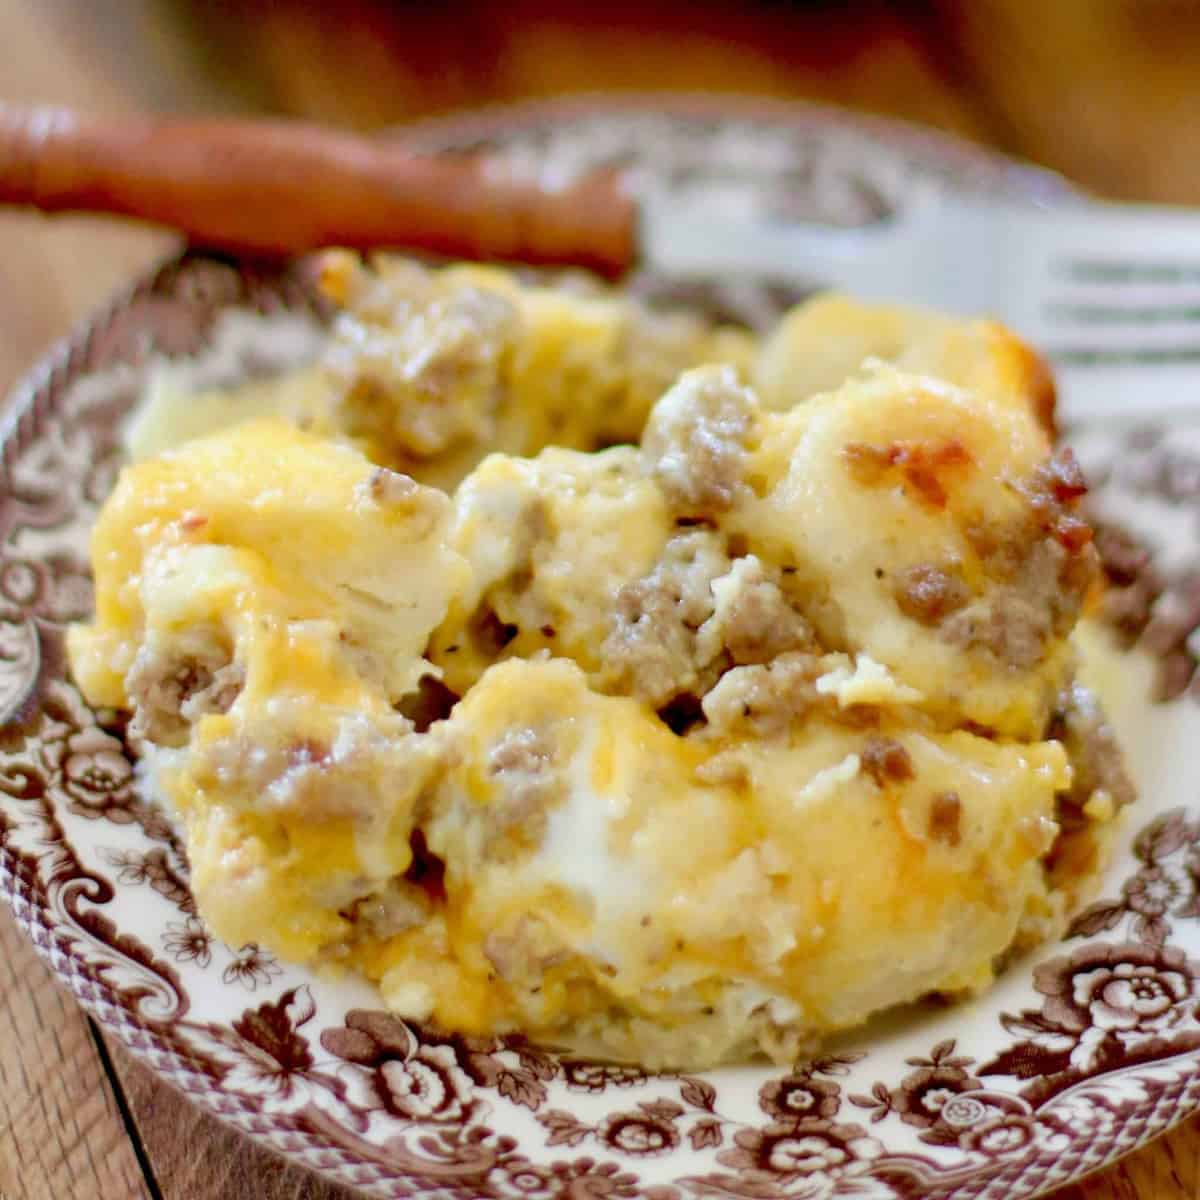 Sausage, Egg and Cheese Gravy Biscuit Breakfast Casserole recipe